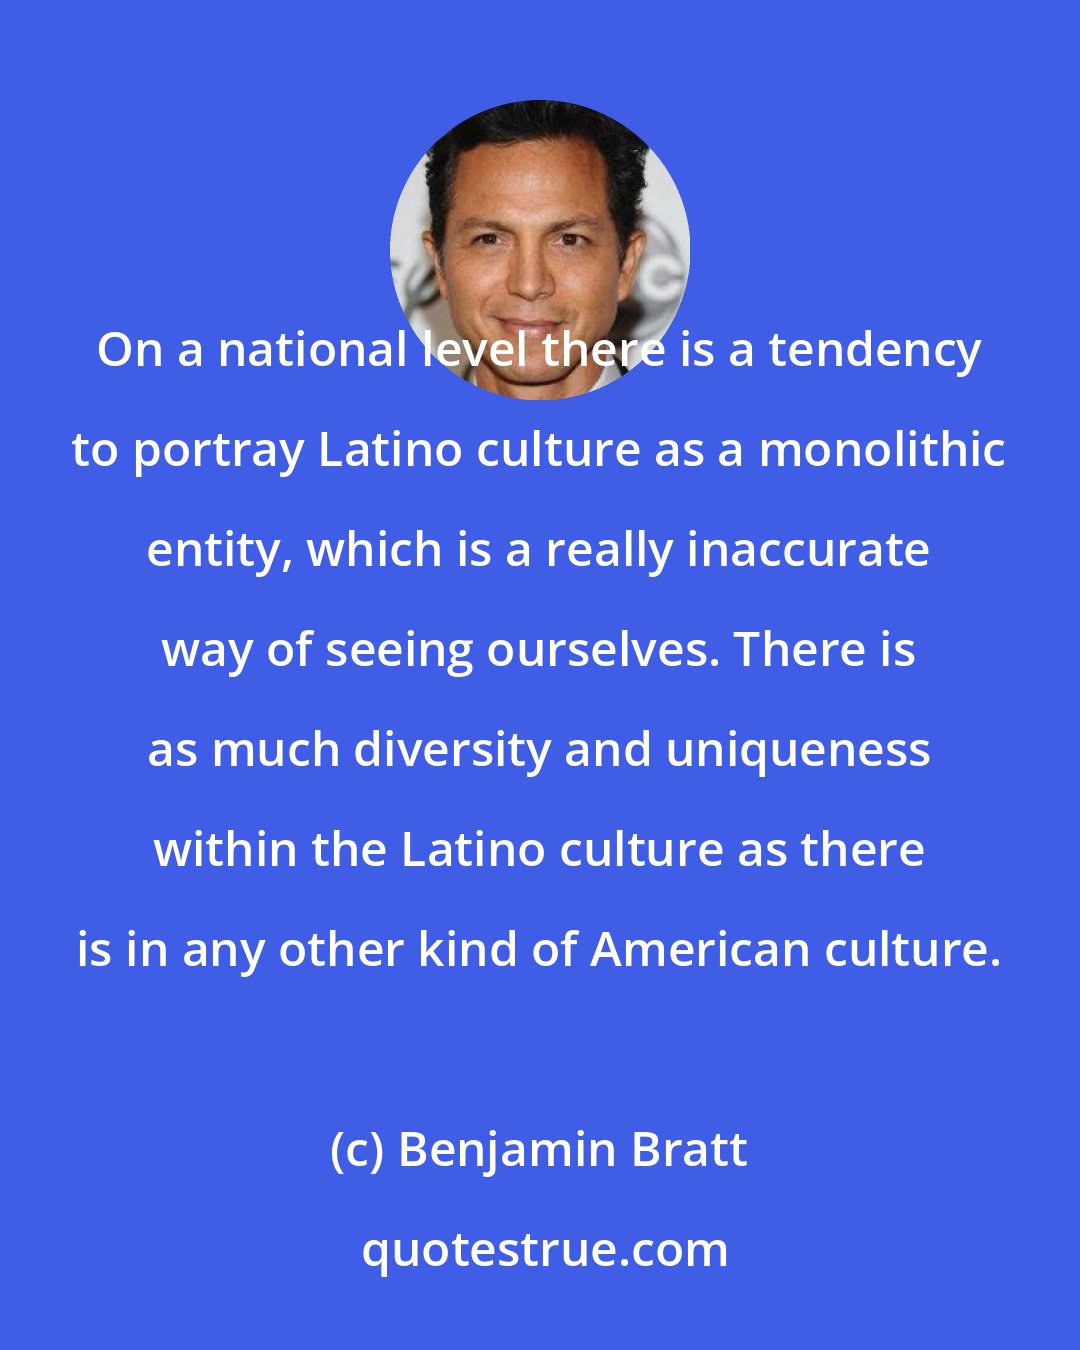 Benjamin Bratt: On a national level there is a tendency to portray Latino culture as a monolithic entity, which is a really inaccurate way of seeing ourselves. There is as much diversity and uniqueness within the Latino culture as there is in any other kind of American culture.